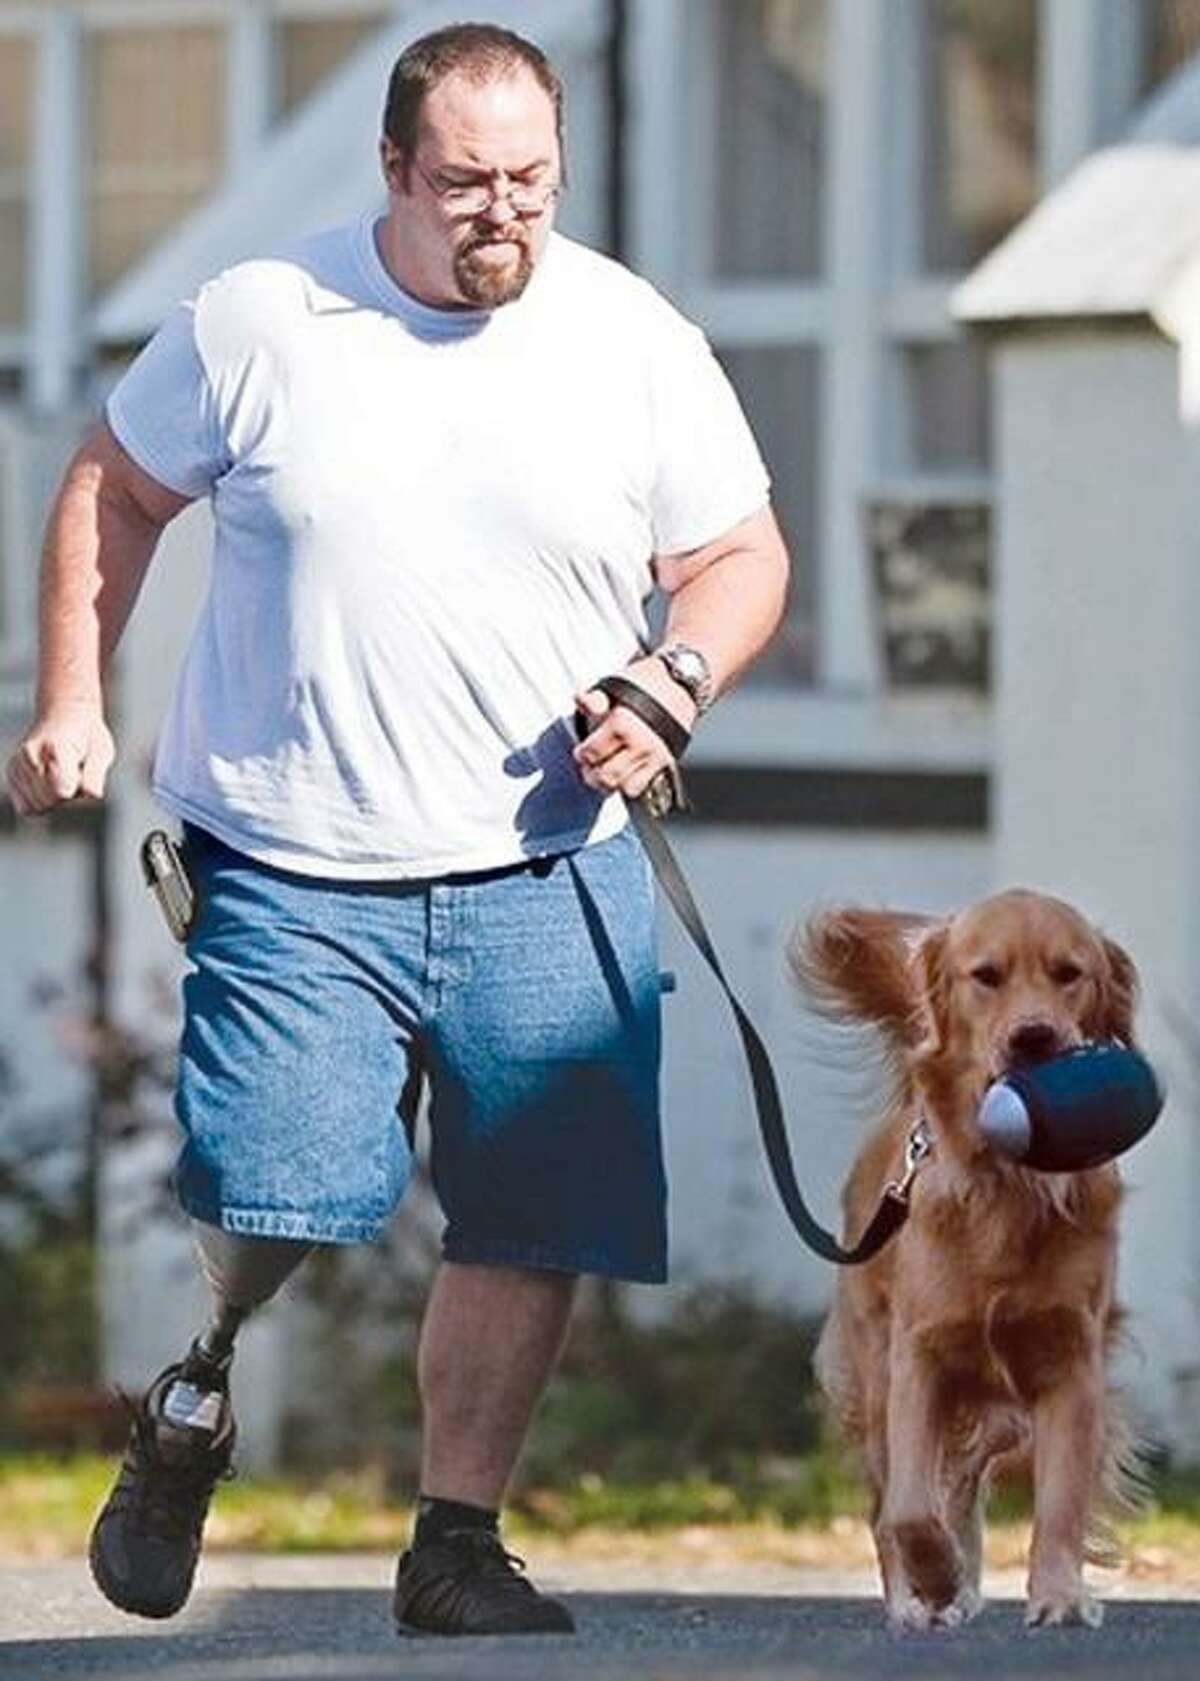 Phil Bauer is a veteran of the Iraq war. After he was seriously injured in Iraq, he returned home and suffered from post-traumatic stress disorder. He came to Project HEAL, a program for wounded warriors and part of the ECAD program. Bauer is running with his service dog, Reese.